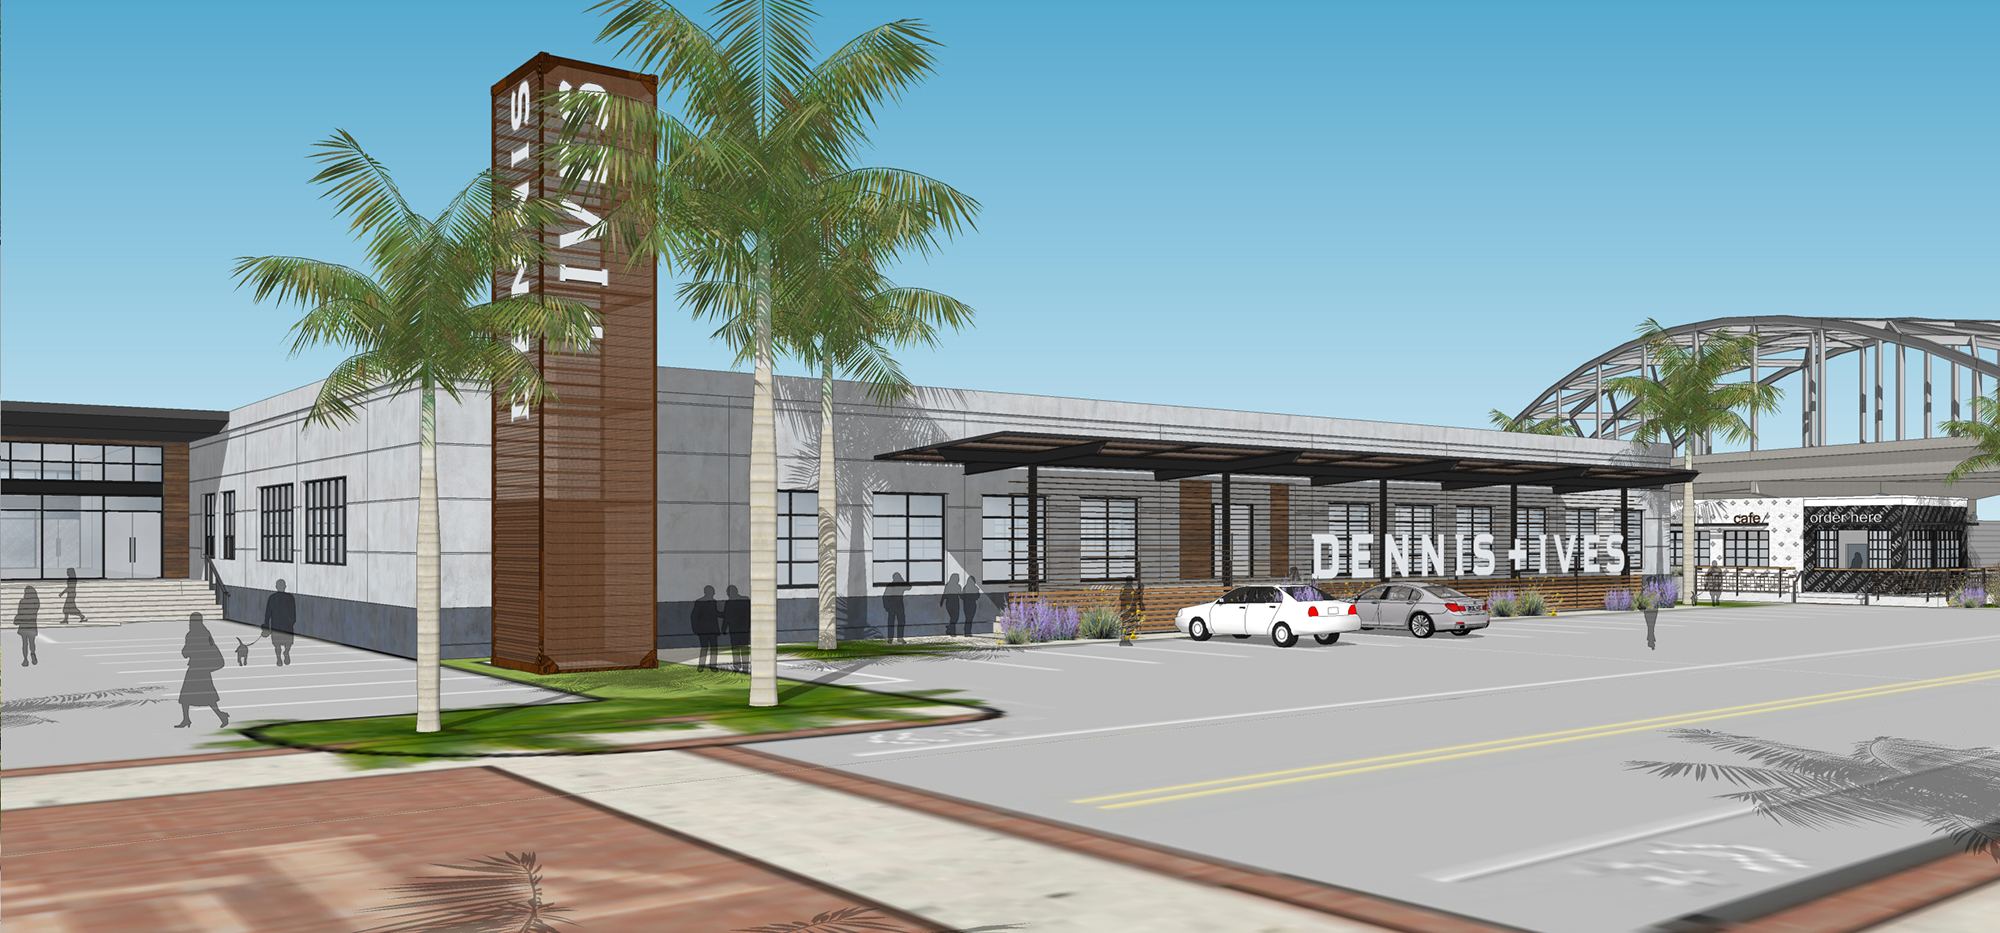 Work is slated to start by year-end at Dennis + Ives, the redevelopment of the former Caribbean Cold Storage property.